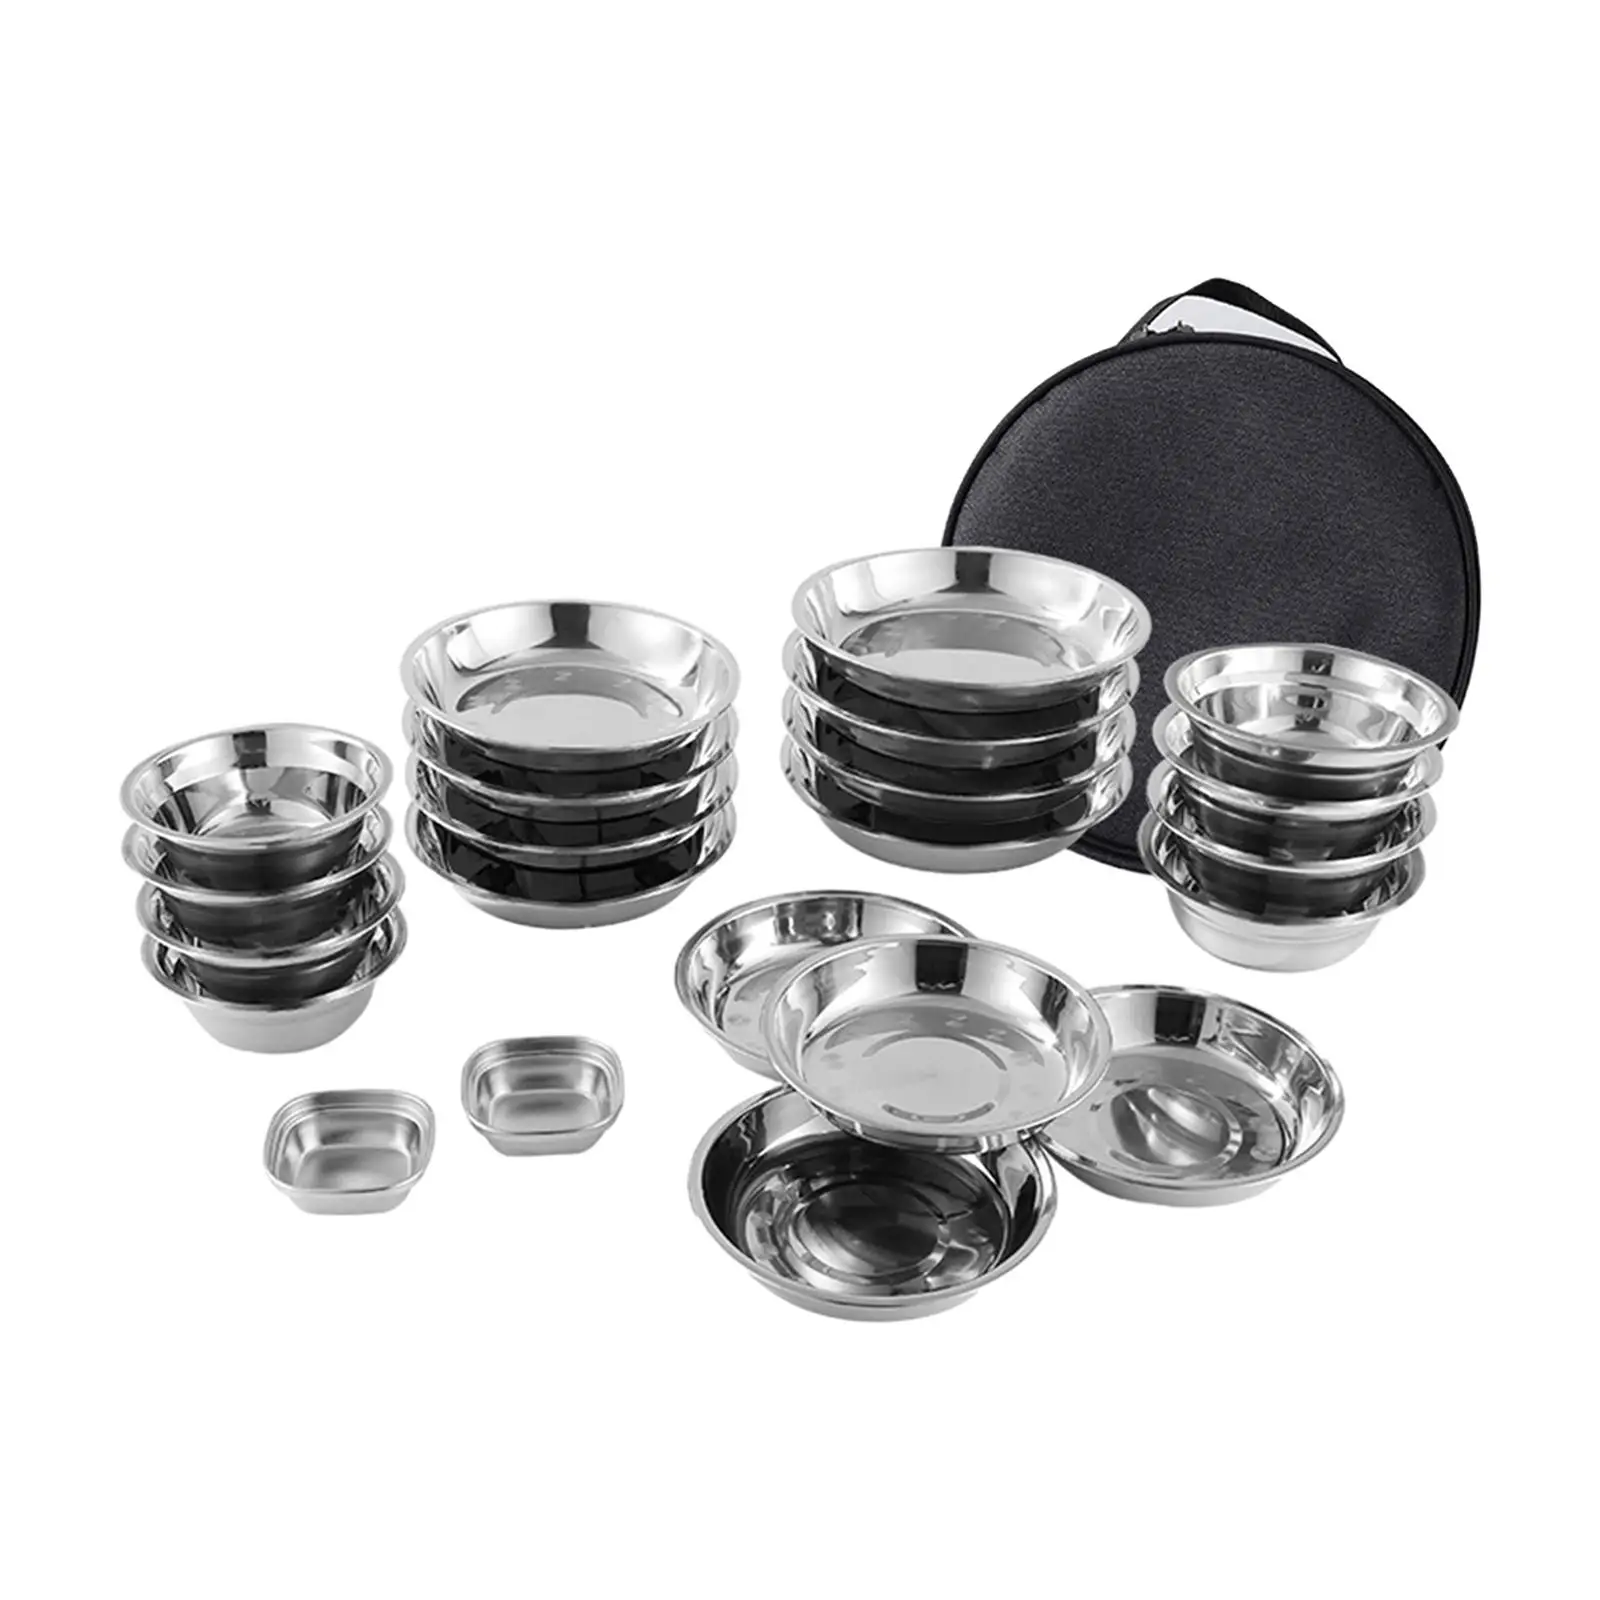 Stainless Steel Plates and Bowls Camping Set Durable for Family Travel Party